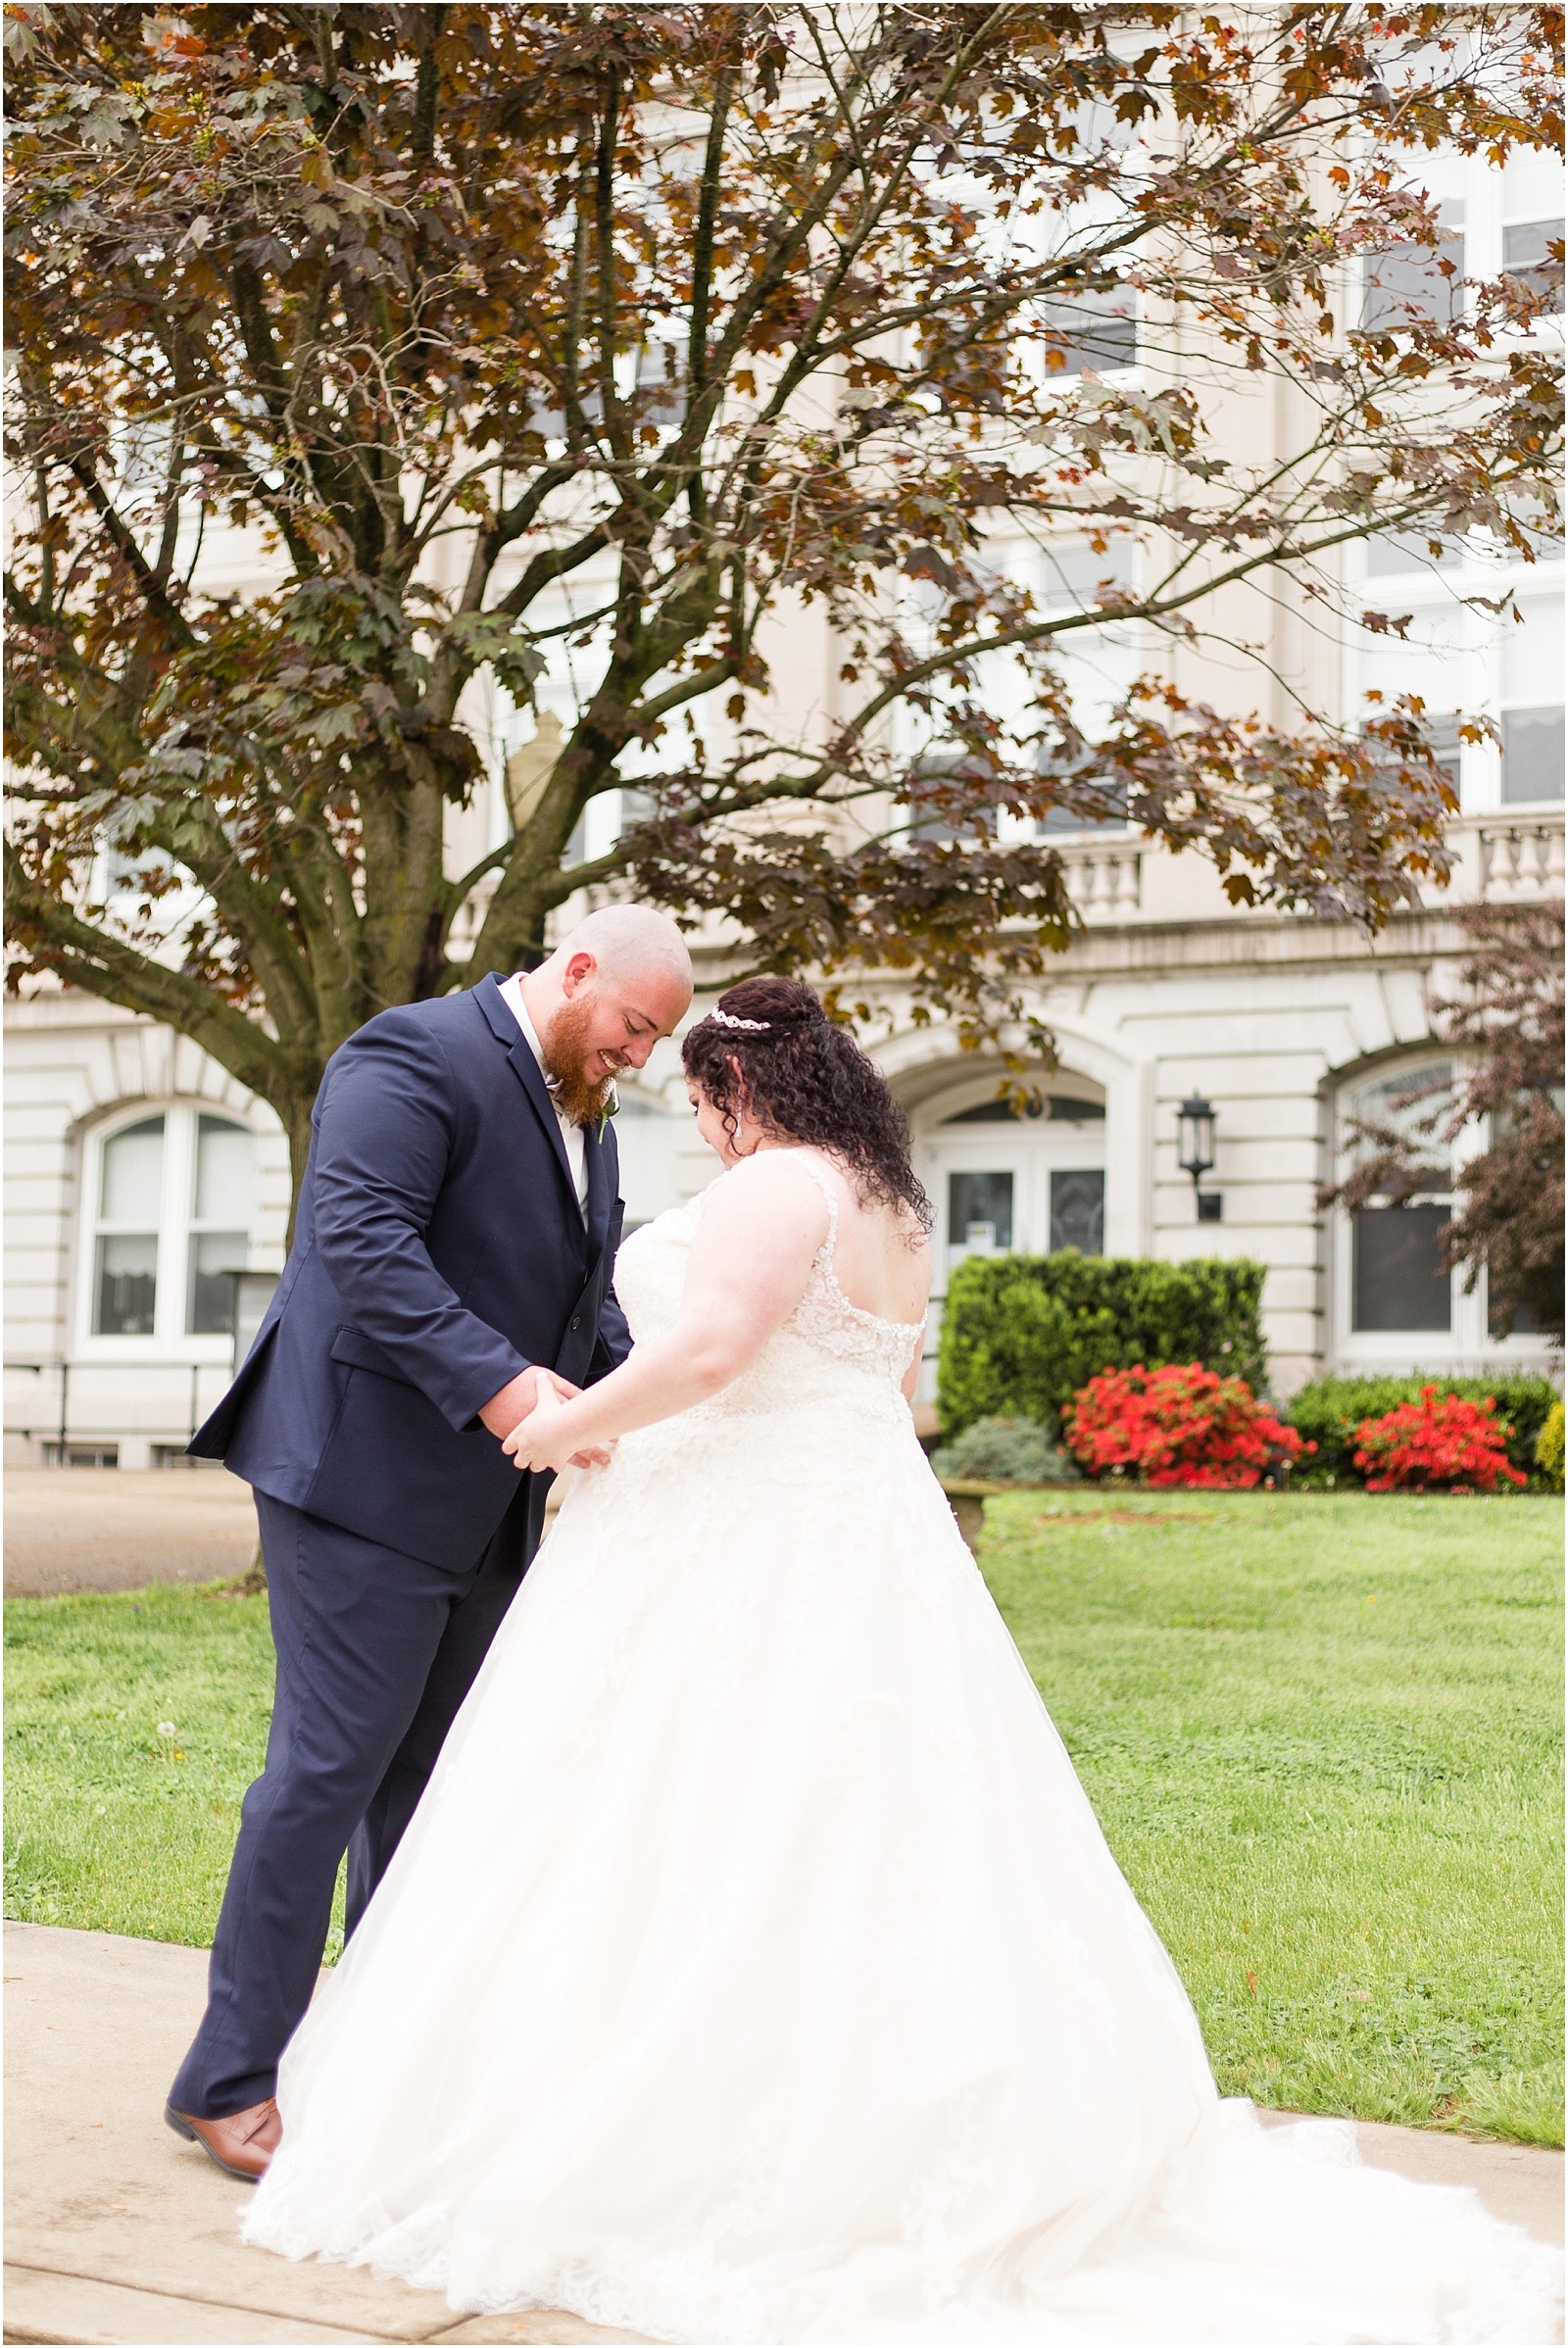 23 Chrissy and Michael | Bret and Brandie Photography.jpg